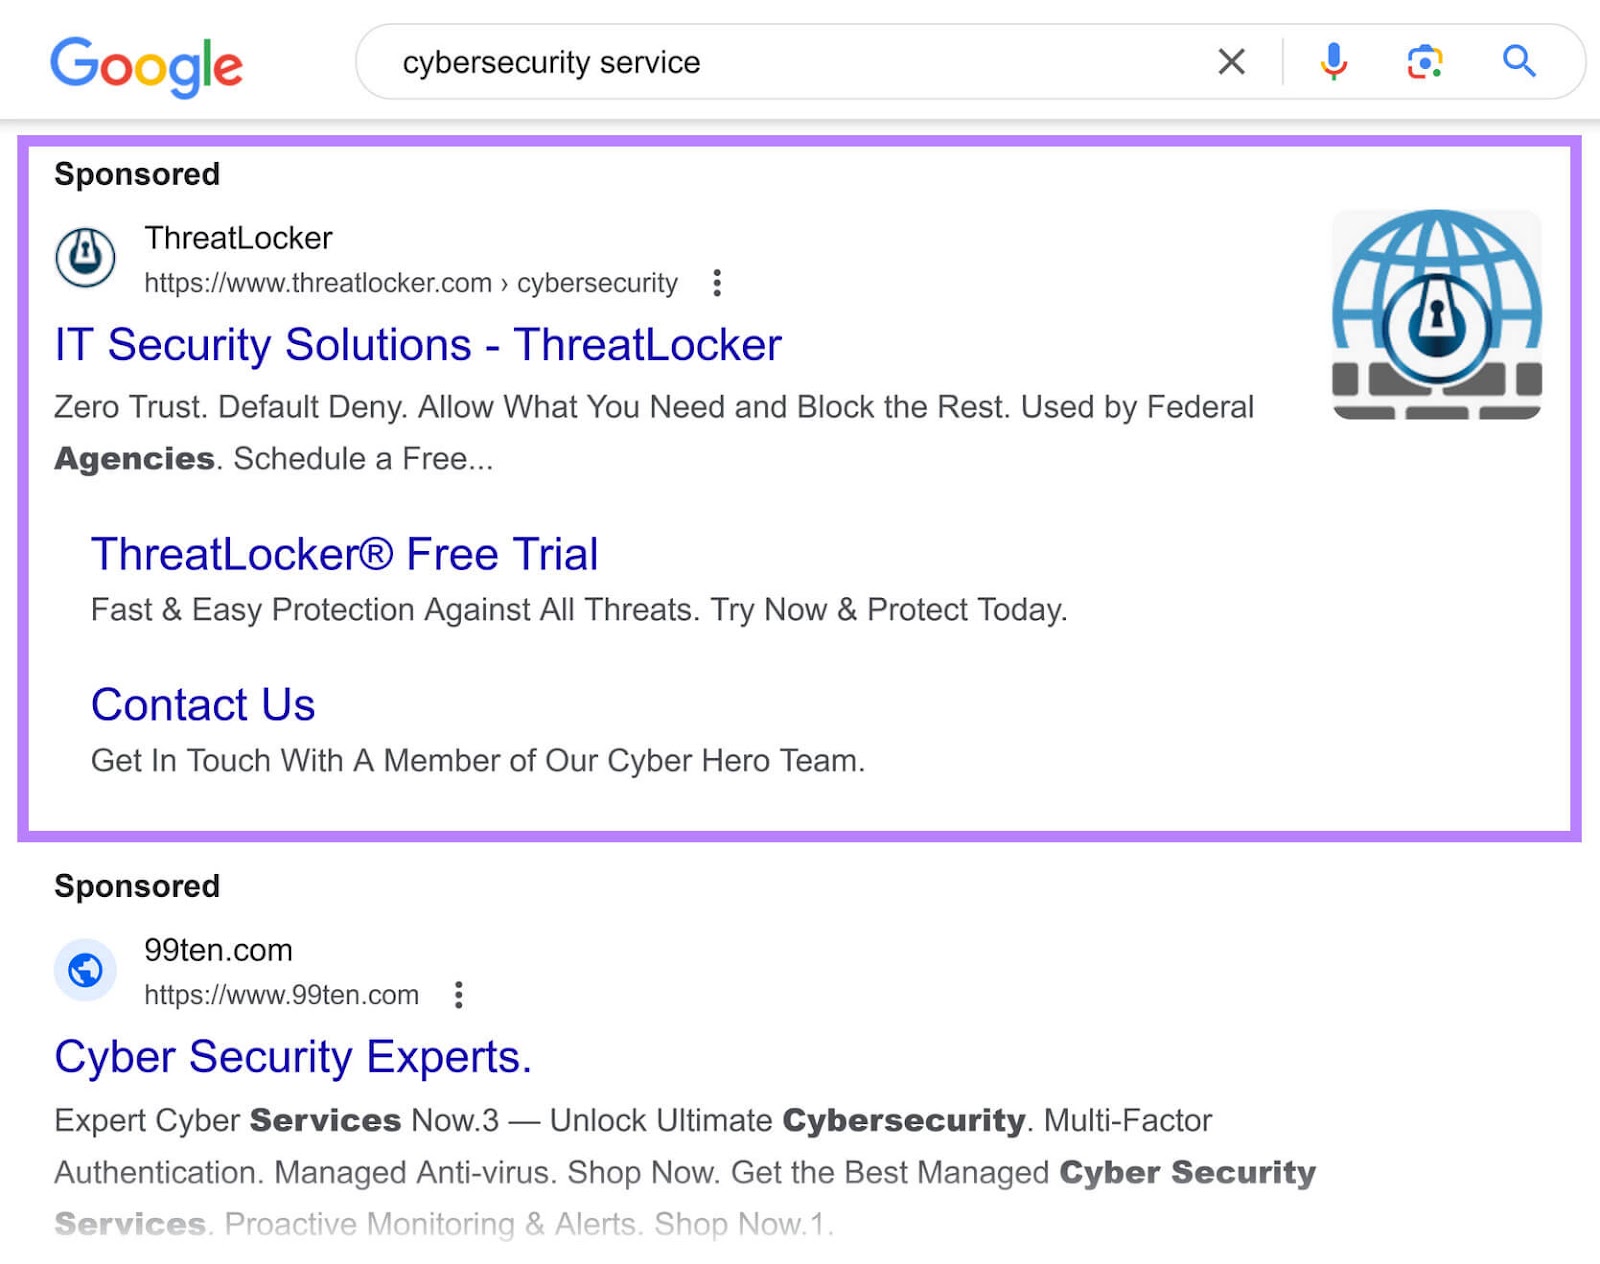 Dynamic search ad (DSA) on Google SERP for